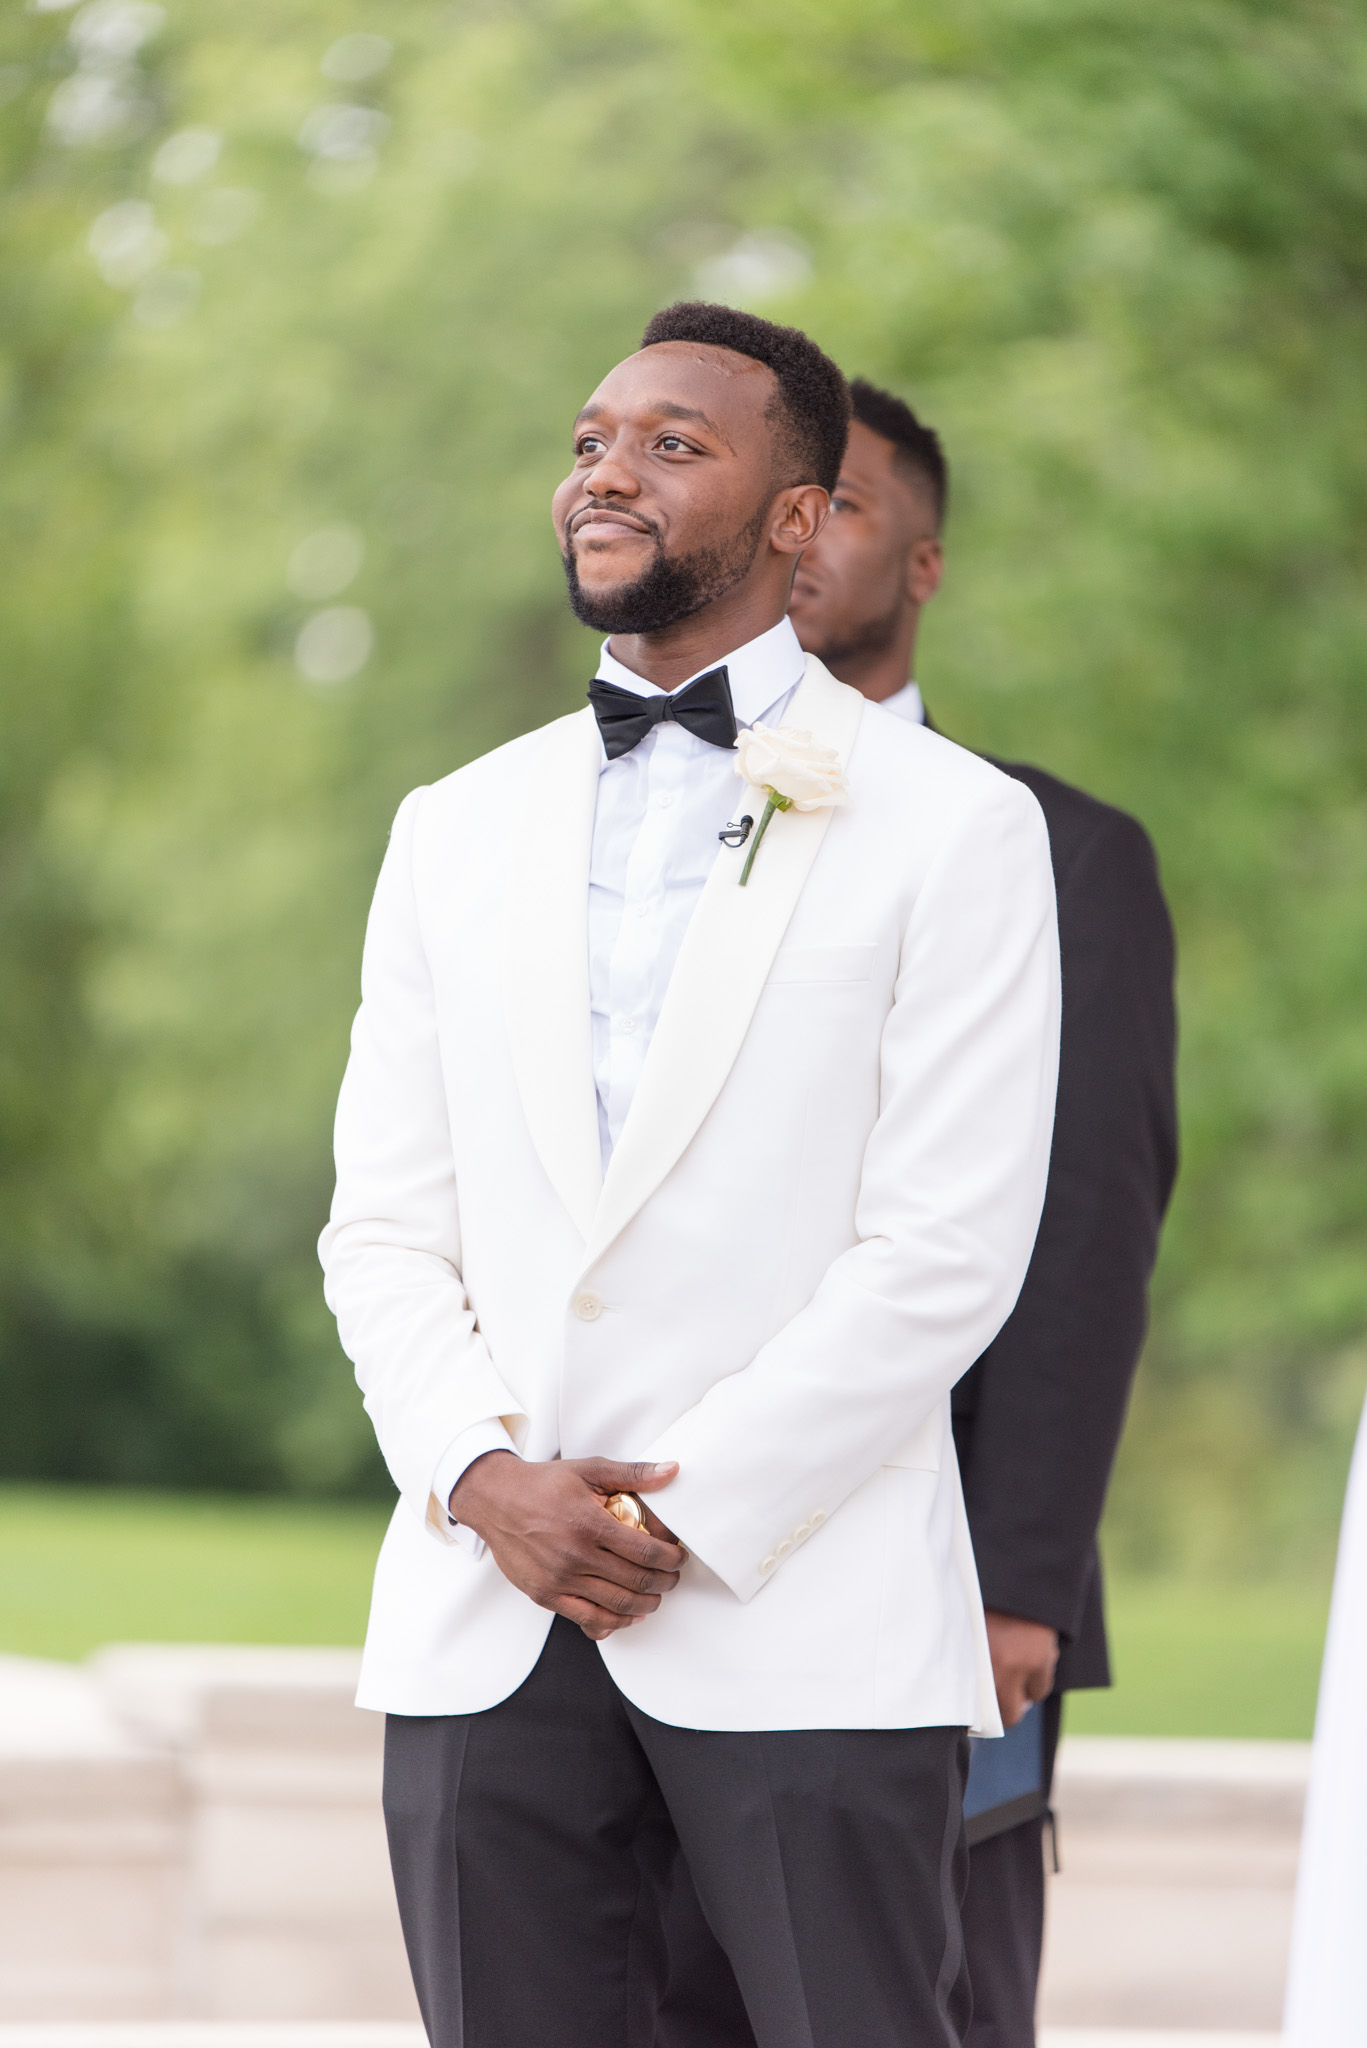 Groom smiles when he sees the bride.